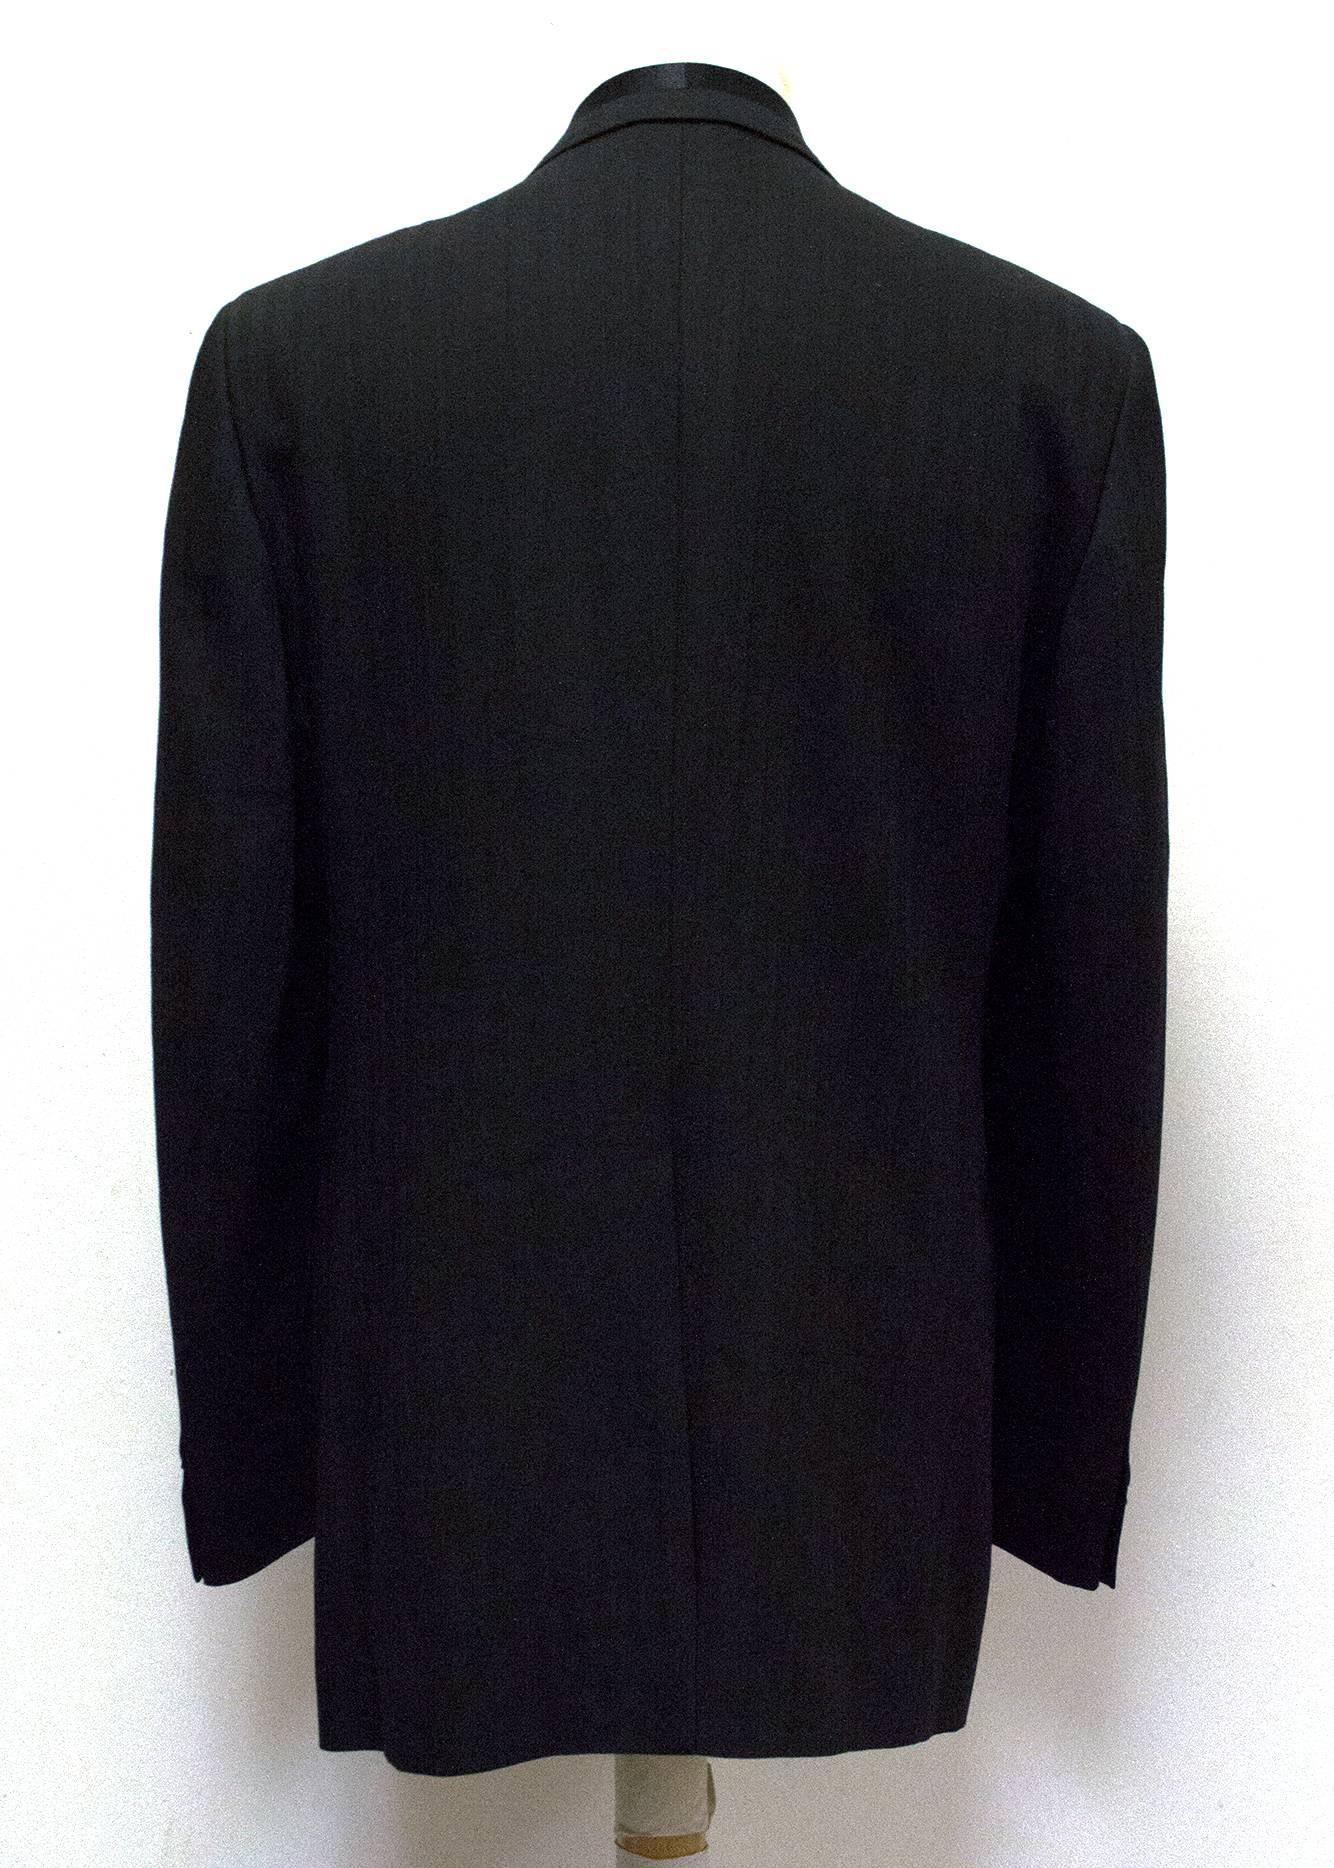  Dolce & Gabbana Black Striped Single-Buttoned Blazer In Excellent Condition For Sale In London, GB